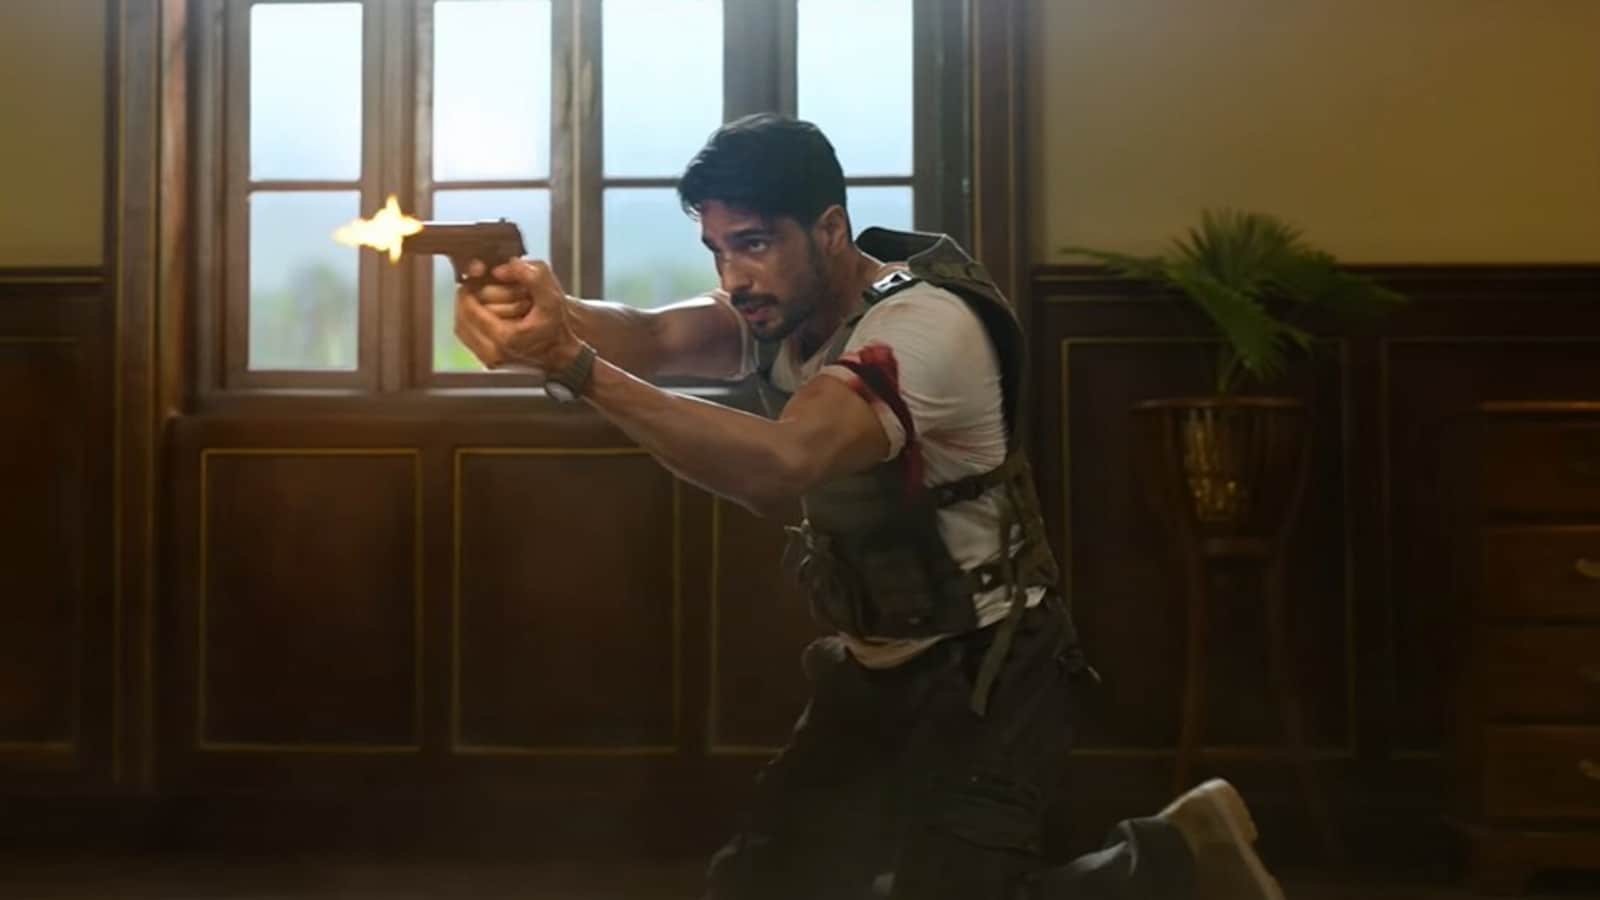 Yodha box office collection day 4: Sidharth Malhotra film witnesses slight dip on first Monday, earns ₹2 crore in India